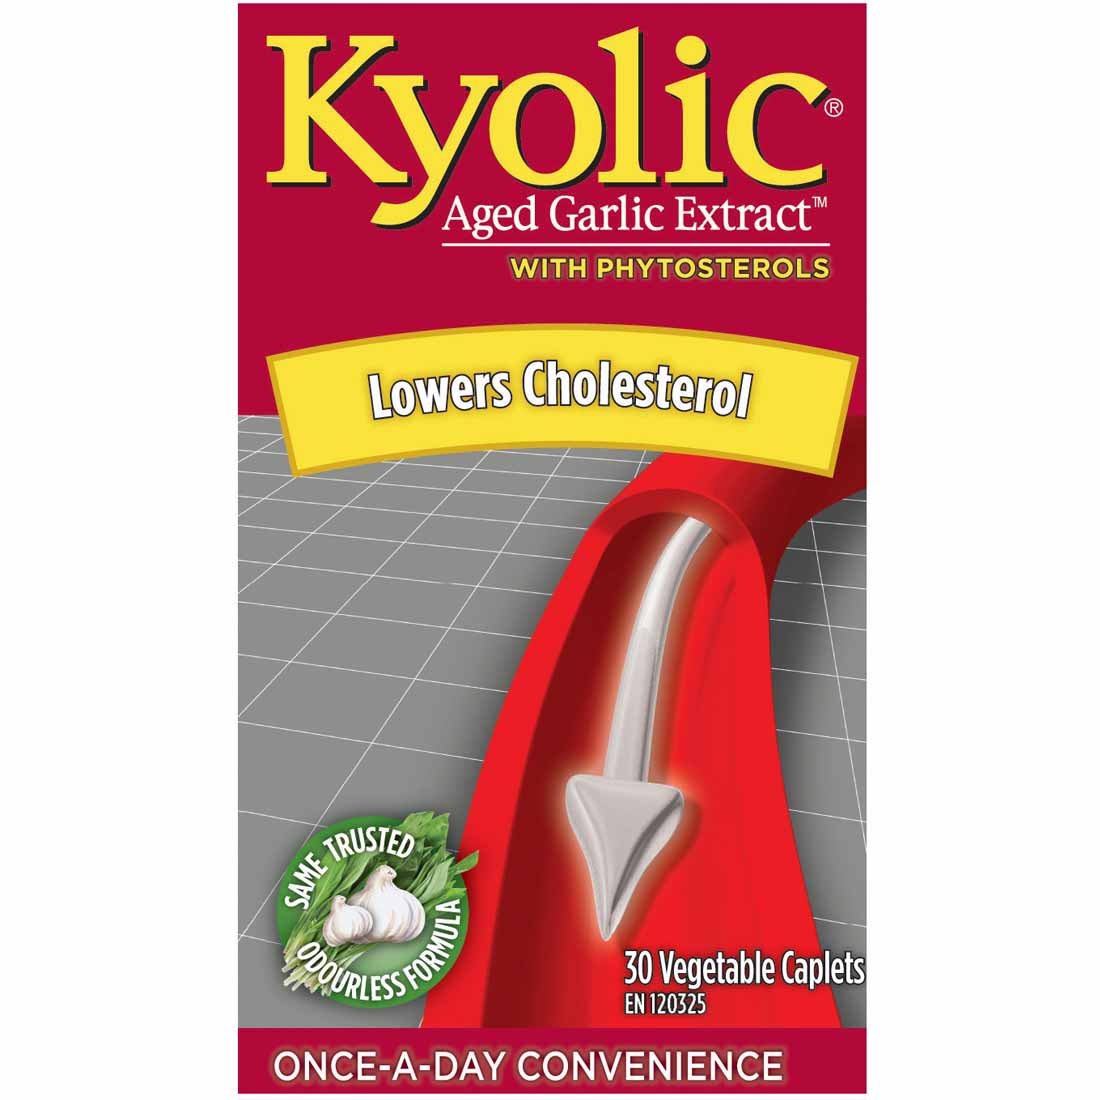 Kyolic Aged Garlic Extract with Phytosterols, Lowers Cholesterol, 30 Vegetable Caplets